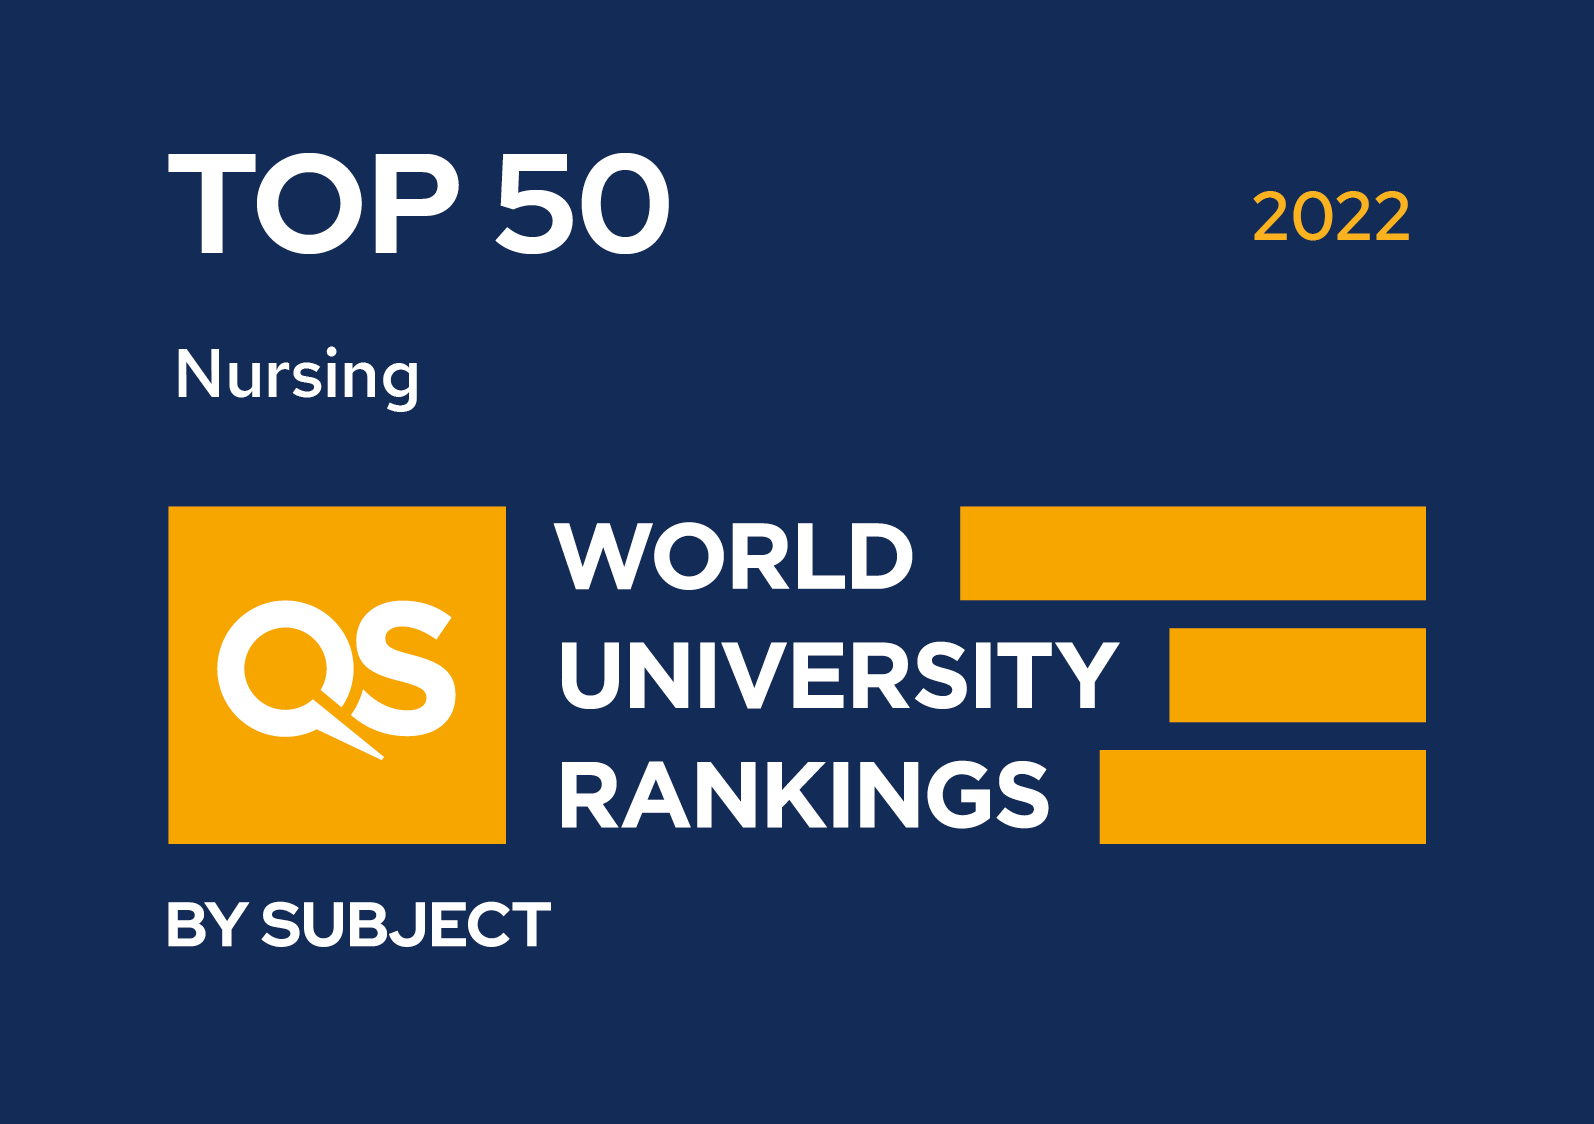 Top 50 In the world for Nursing